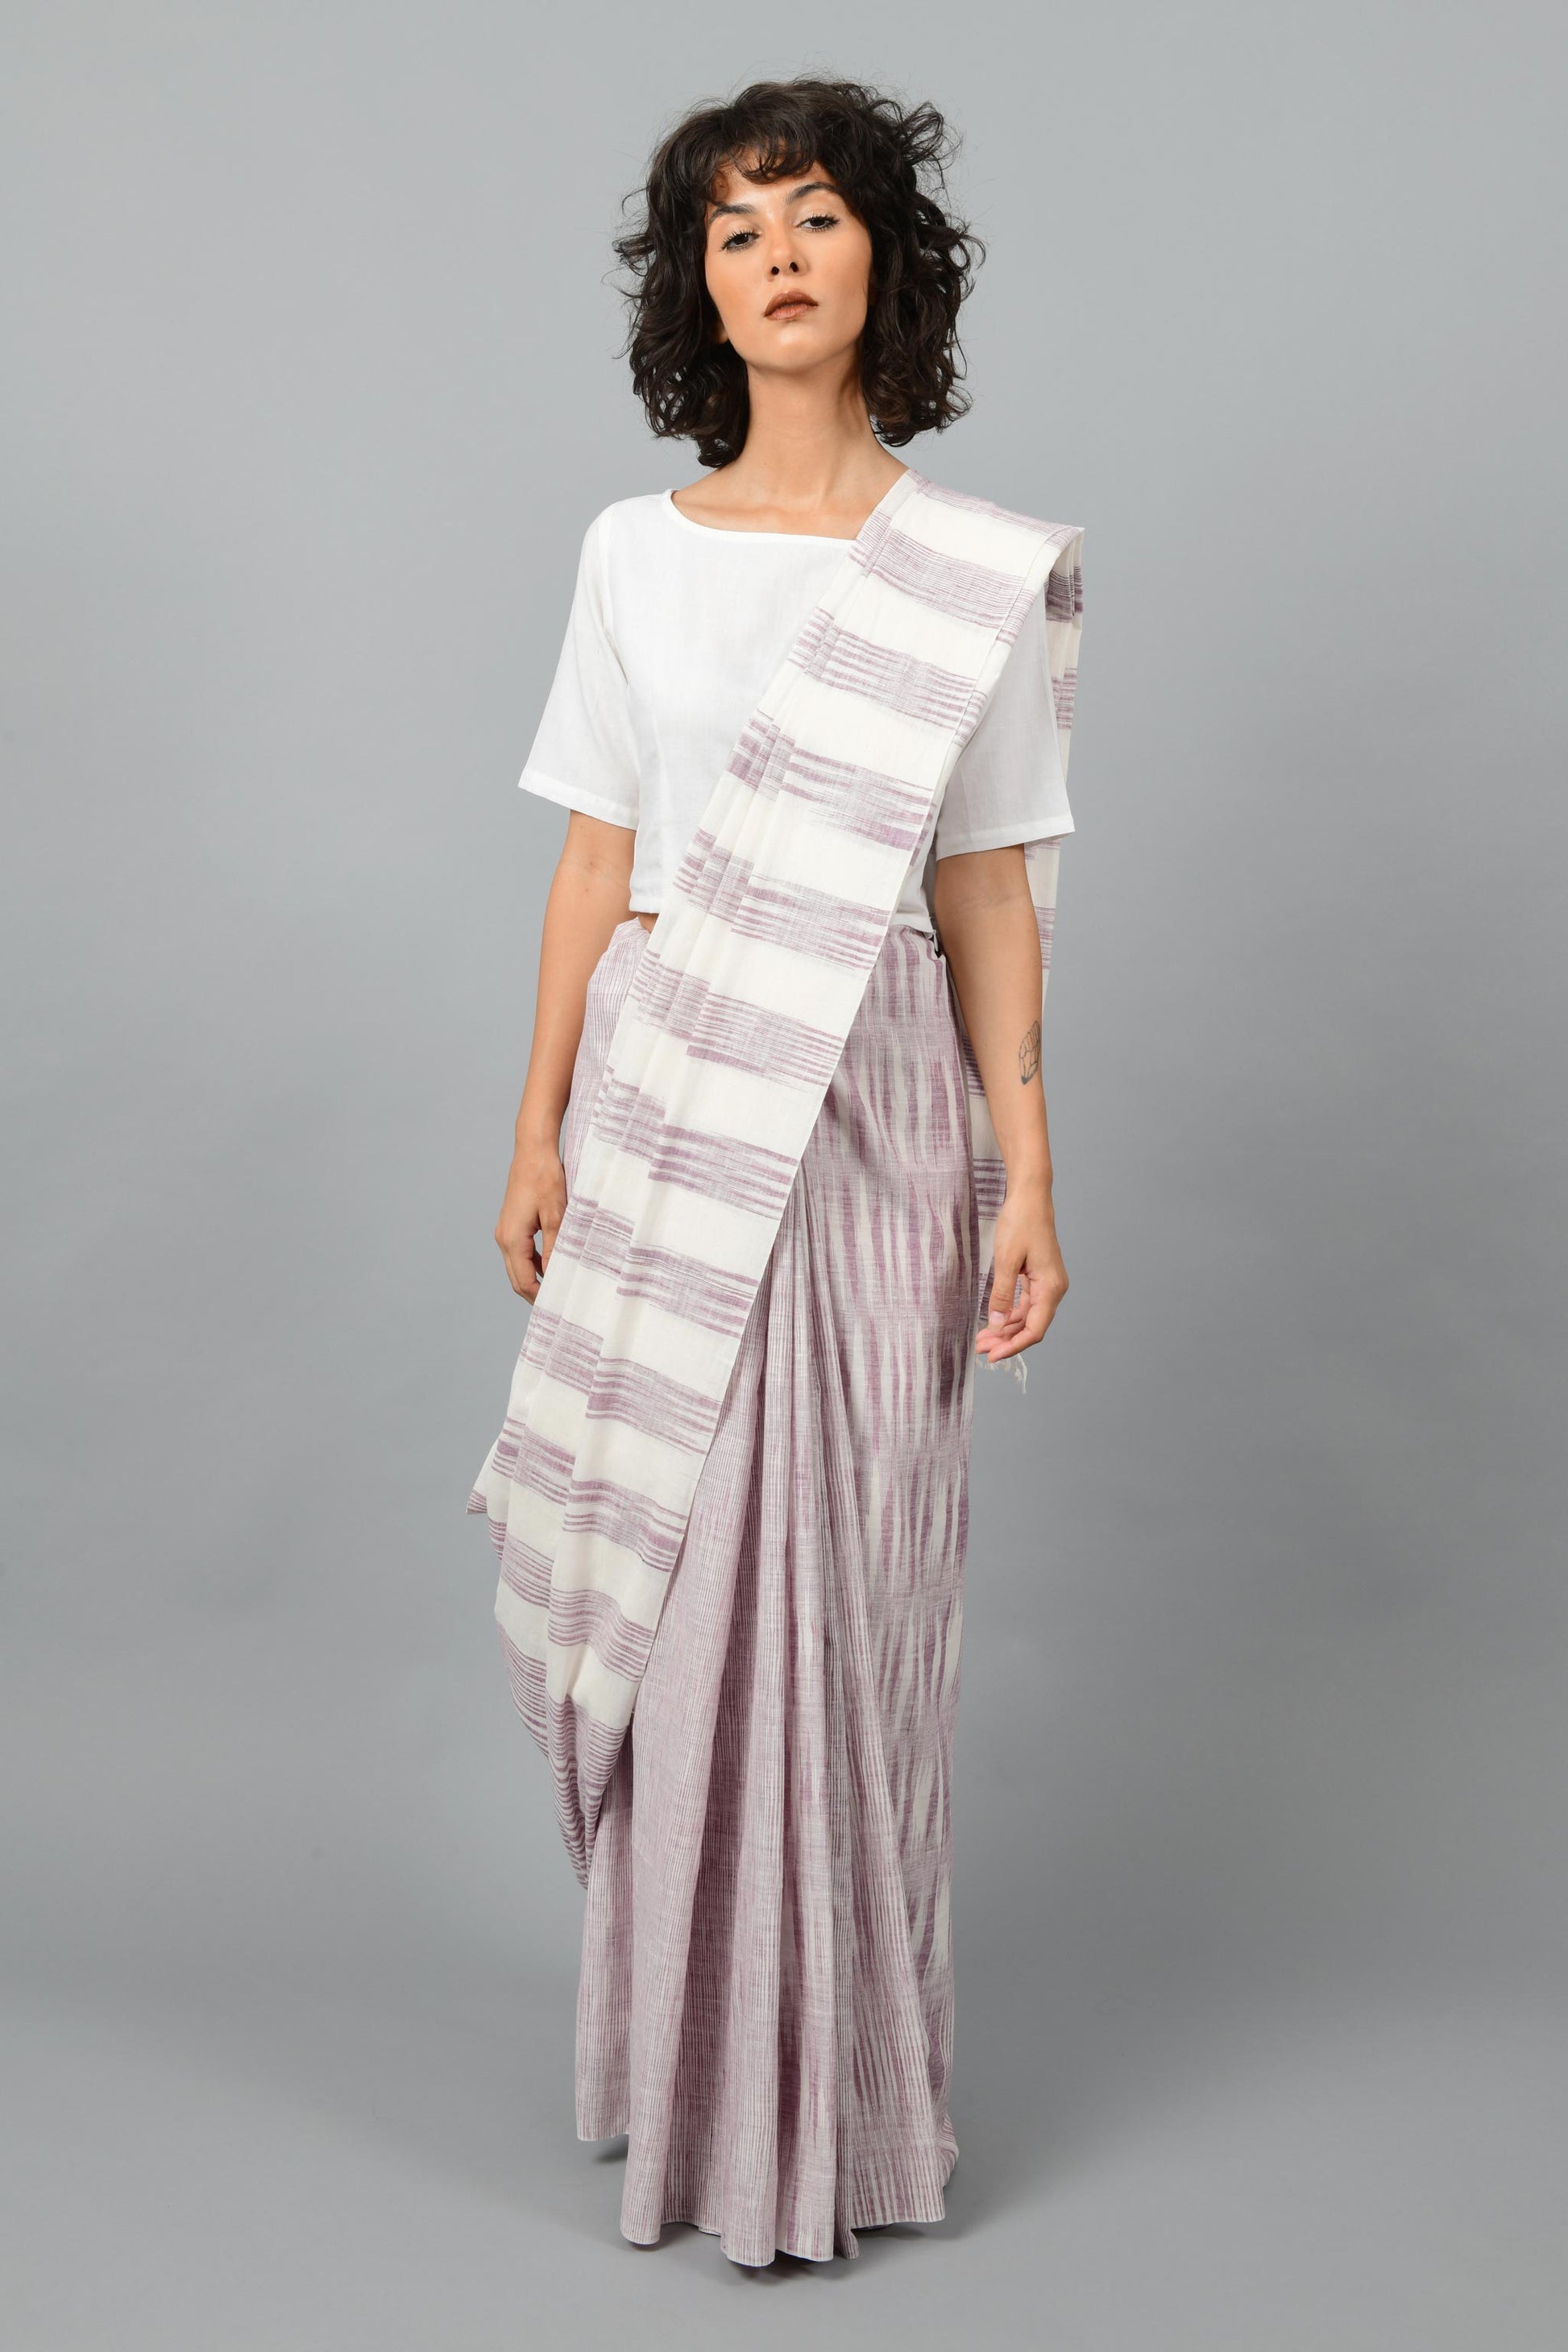 Front pose of a female womenswear fashion model draped in a purple & white space dyed homespun and handwoven cotton saree by Cotton Rack.